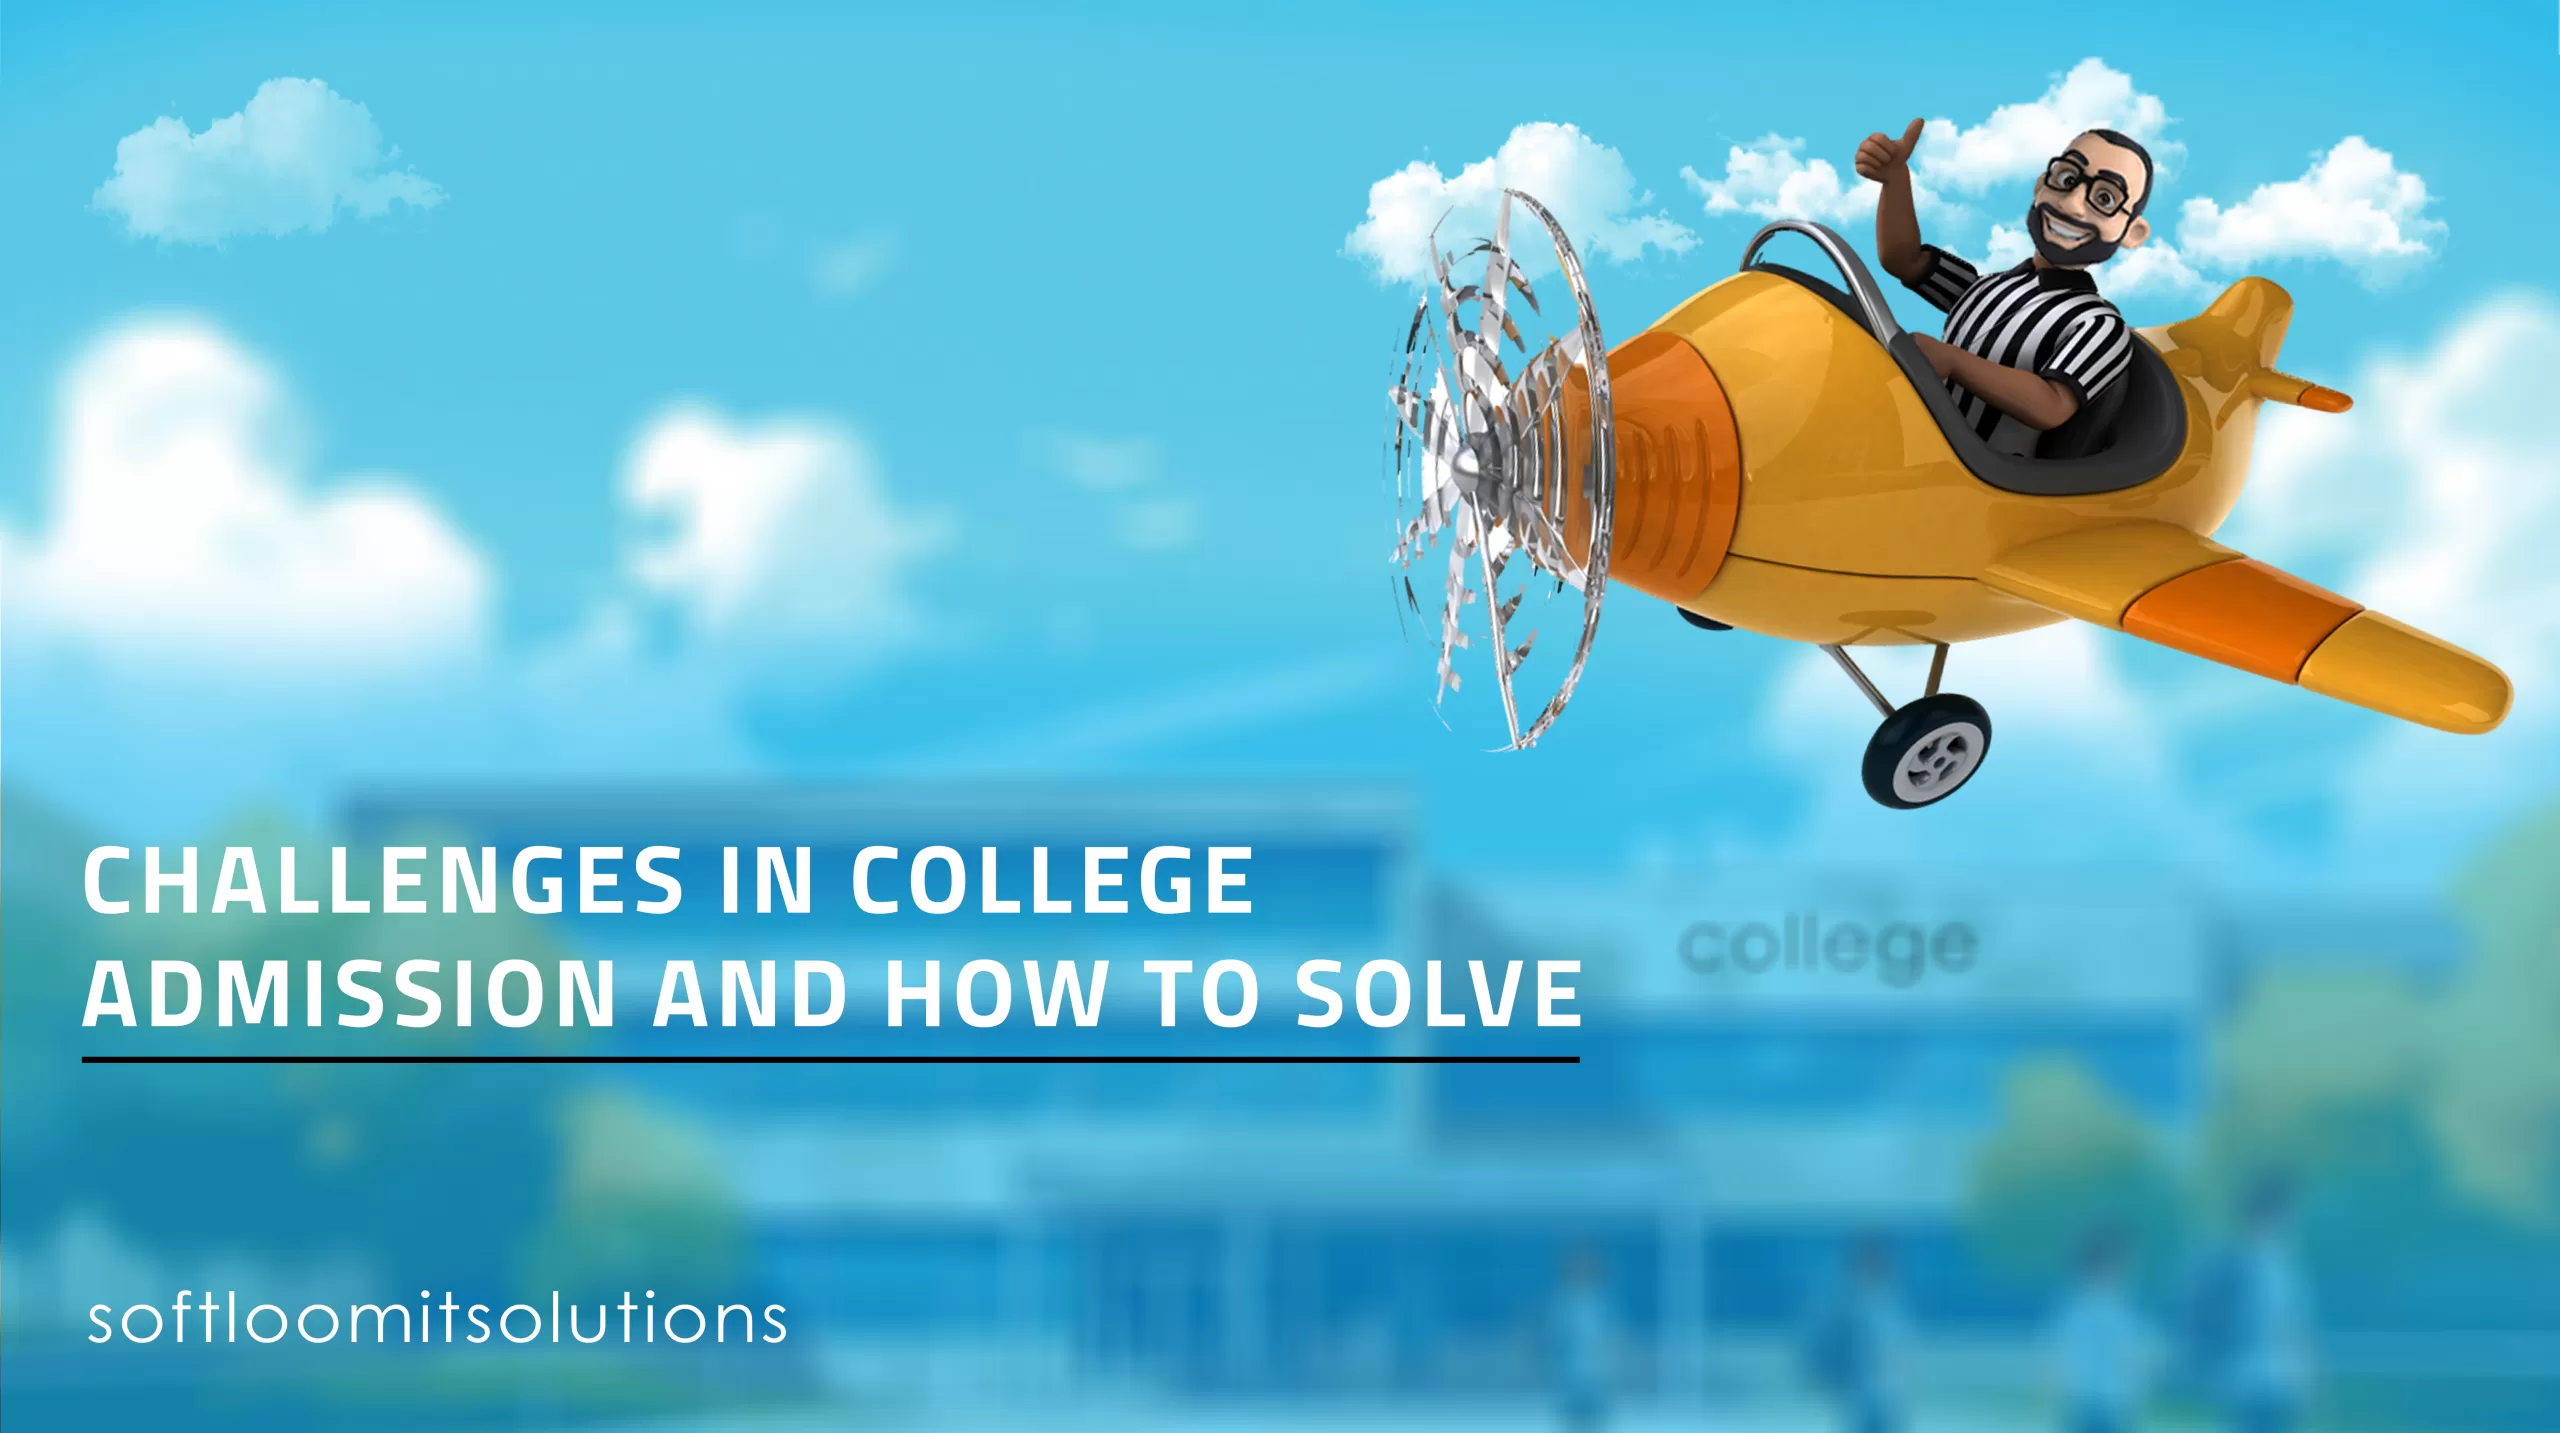 Admission Management System For Solving Challenges in College Admission